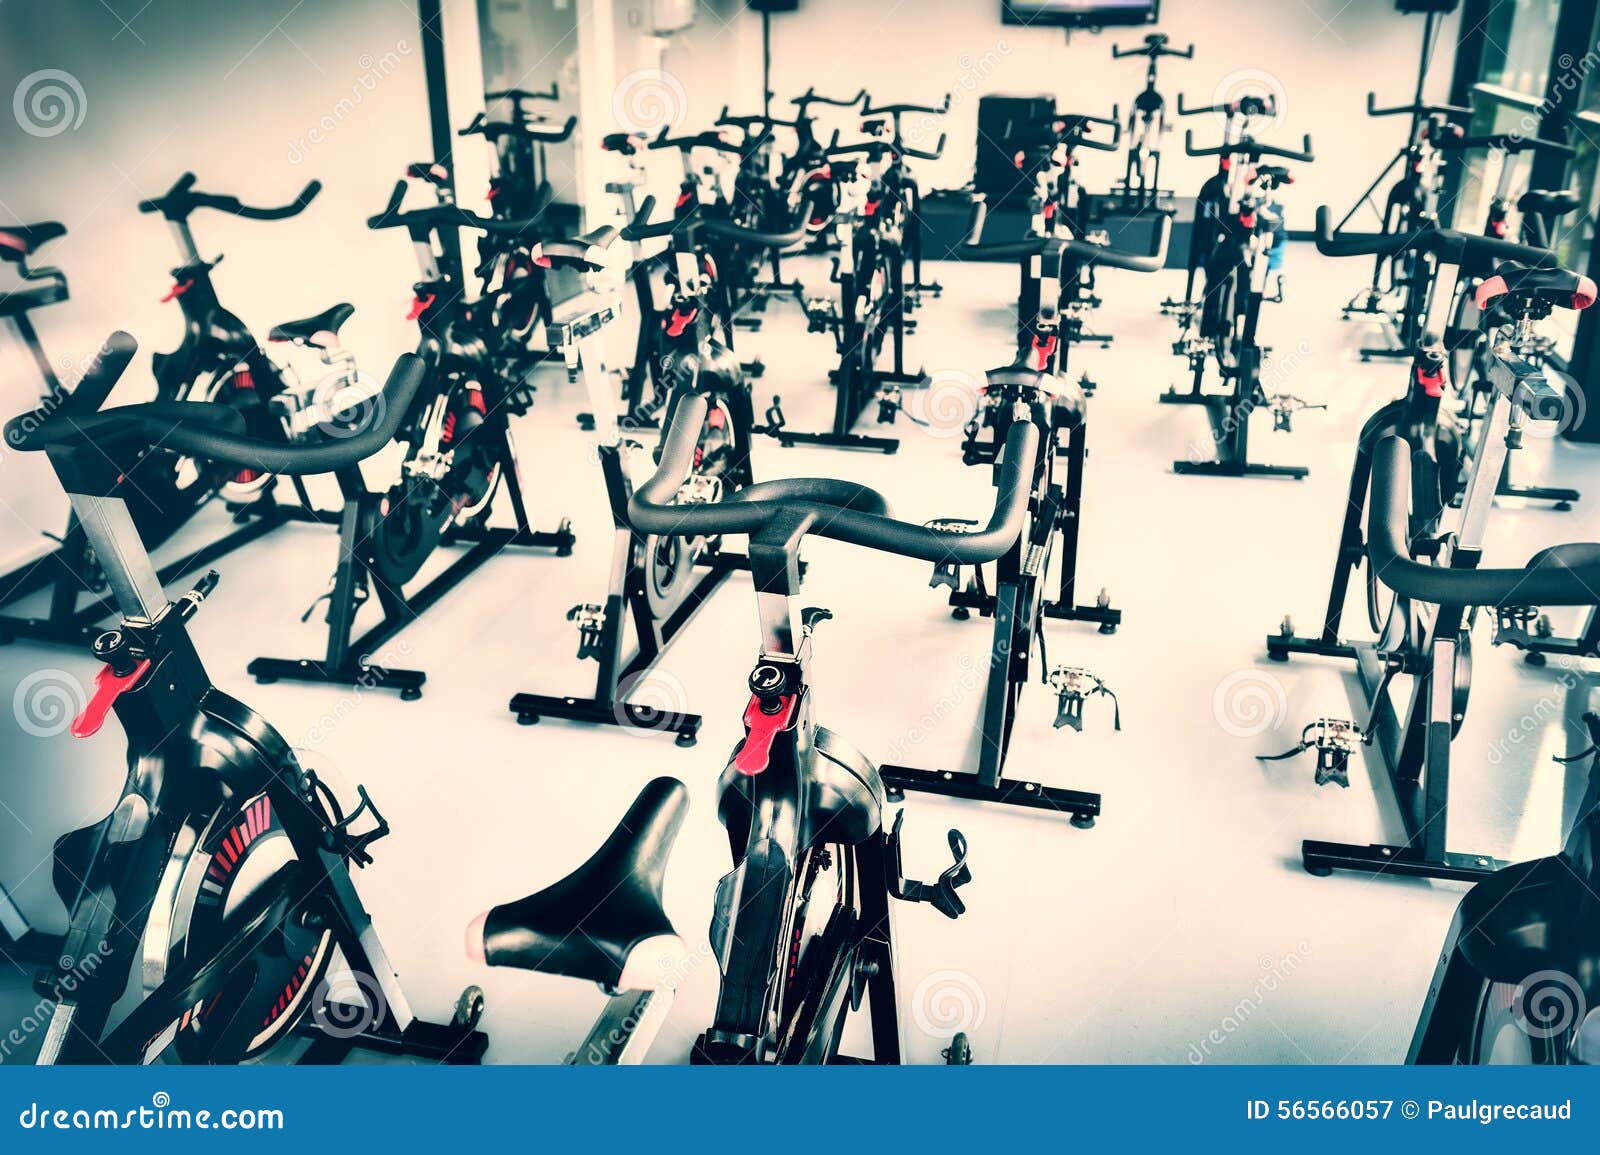 spinning class with empty bikes